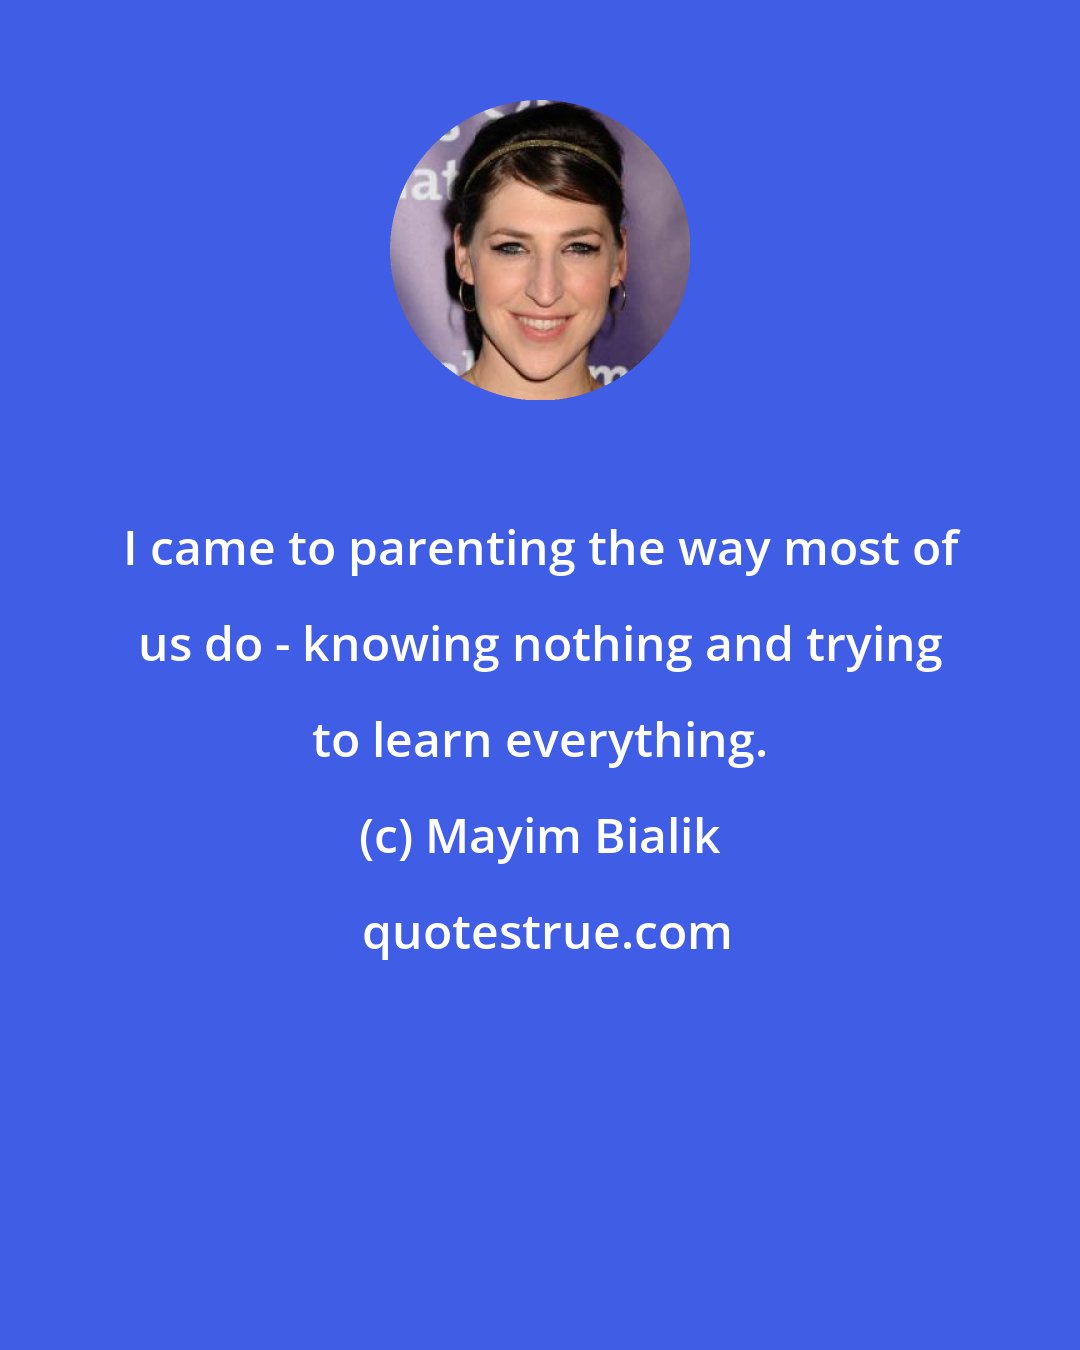 Mayim Bialik: I came to parenting the way most of us do - knowing nothing and trying to learn everything.